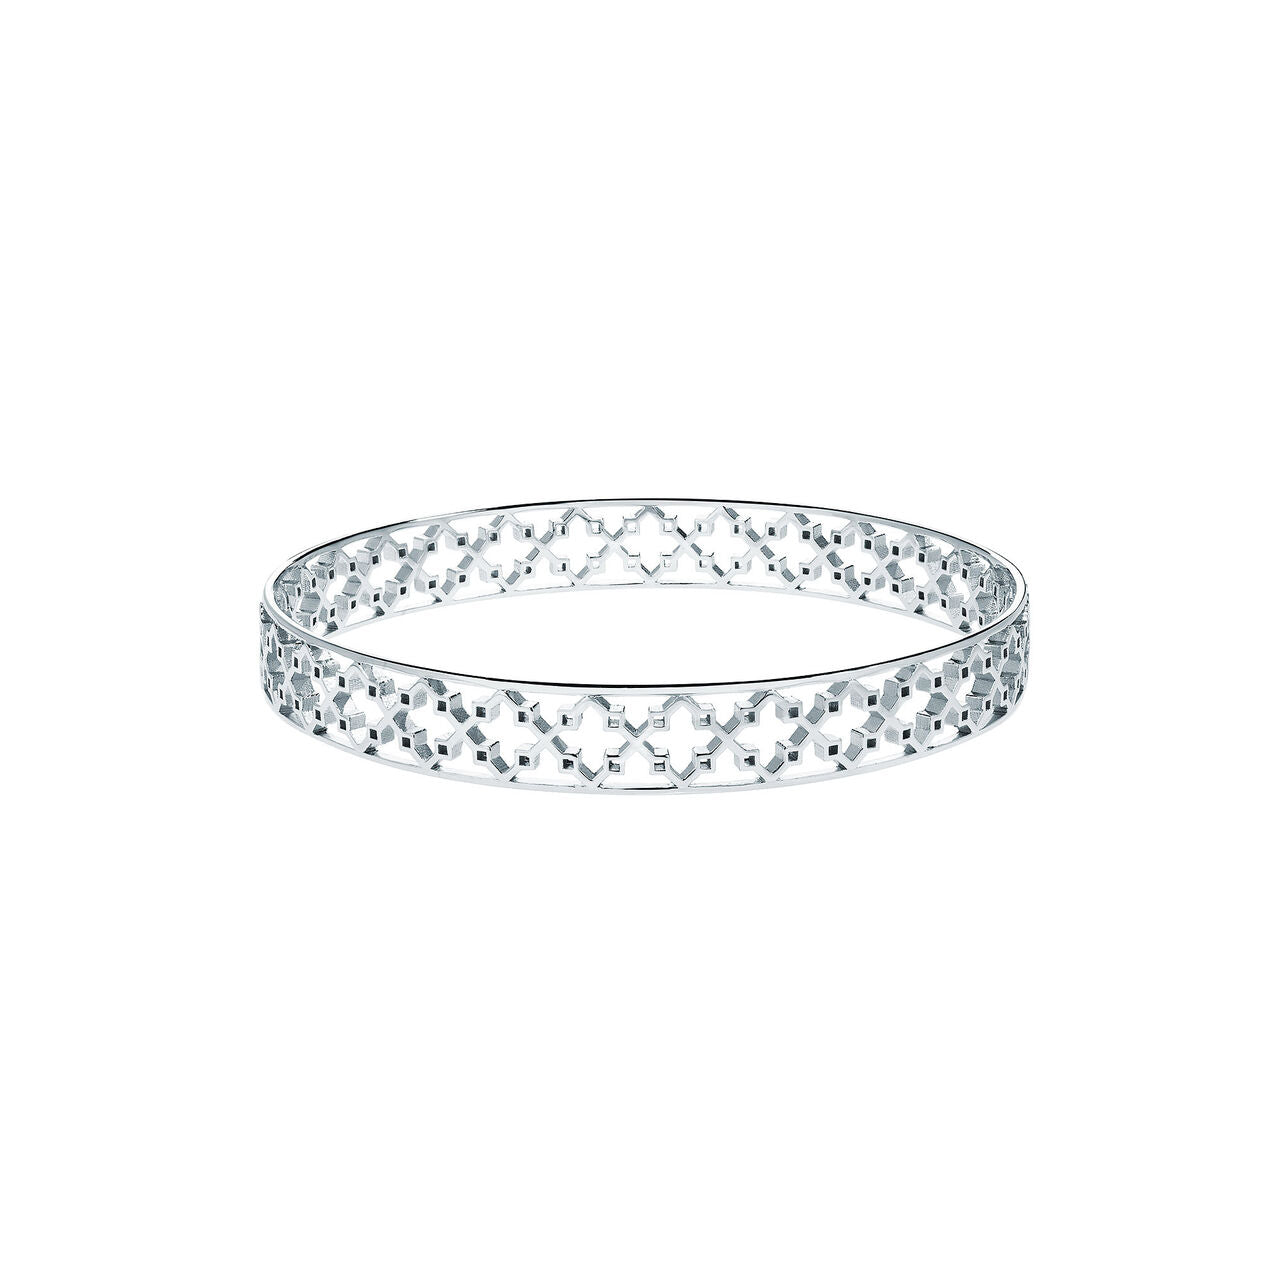 Birks Silver Muse Bangle with Mesh